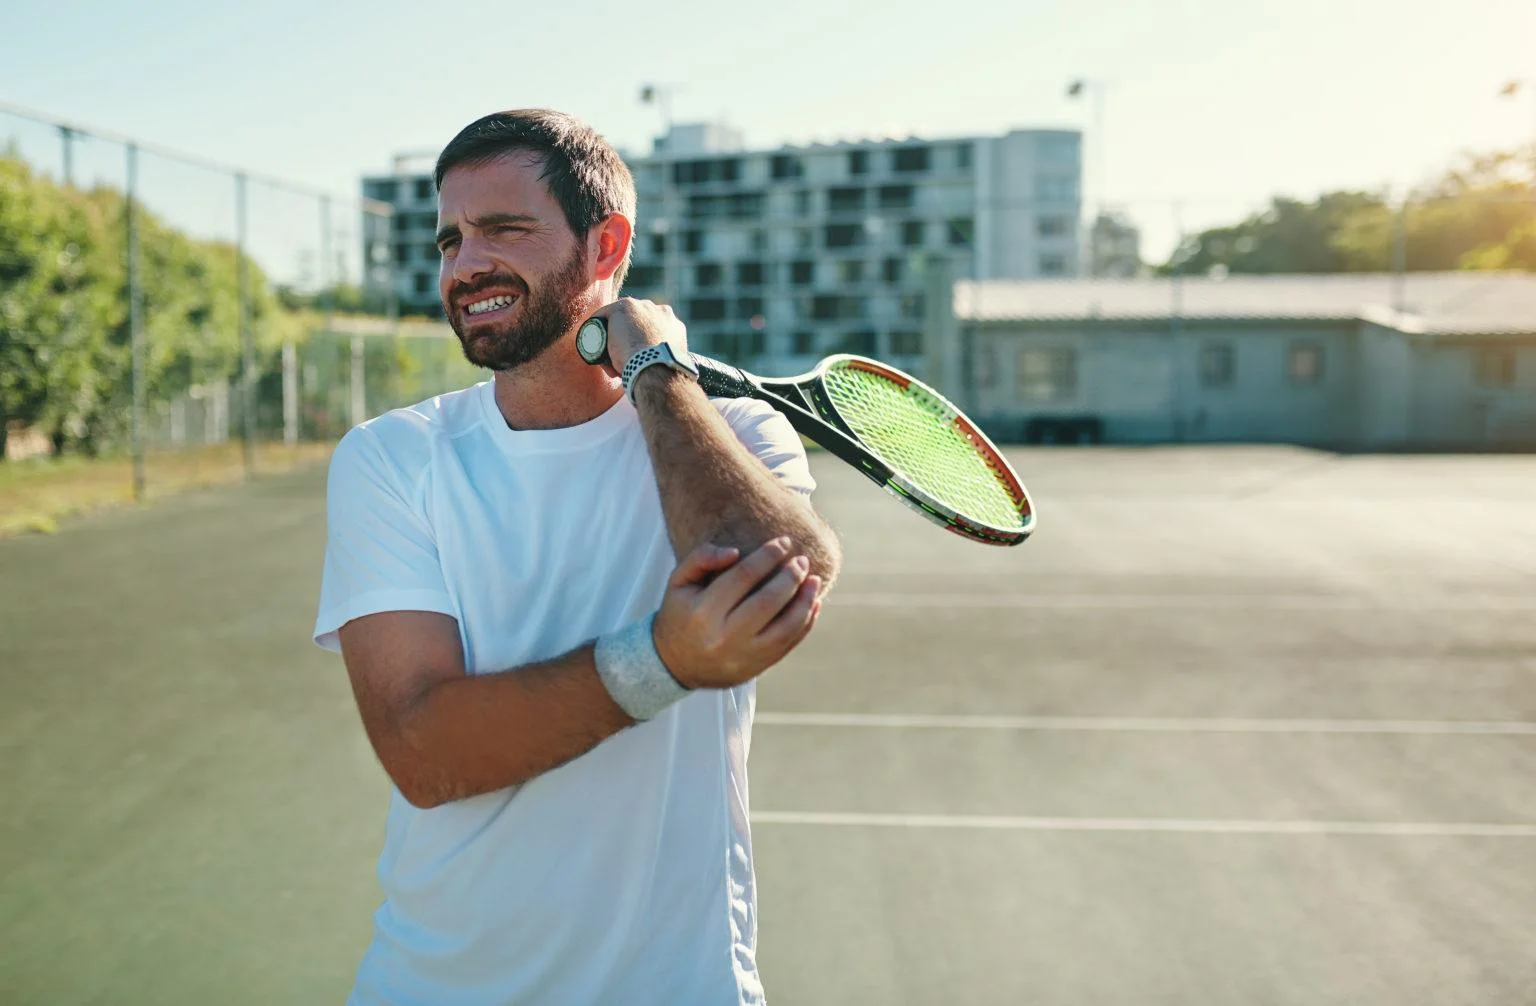 Common Tennis Injuries and How to Manage Them